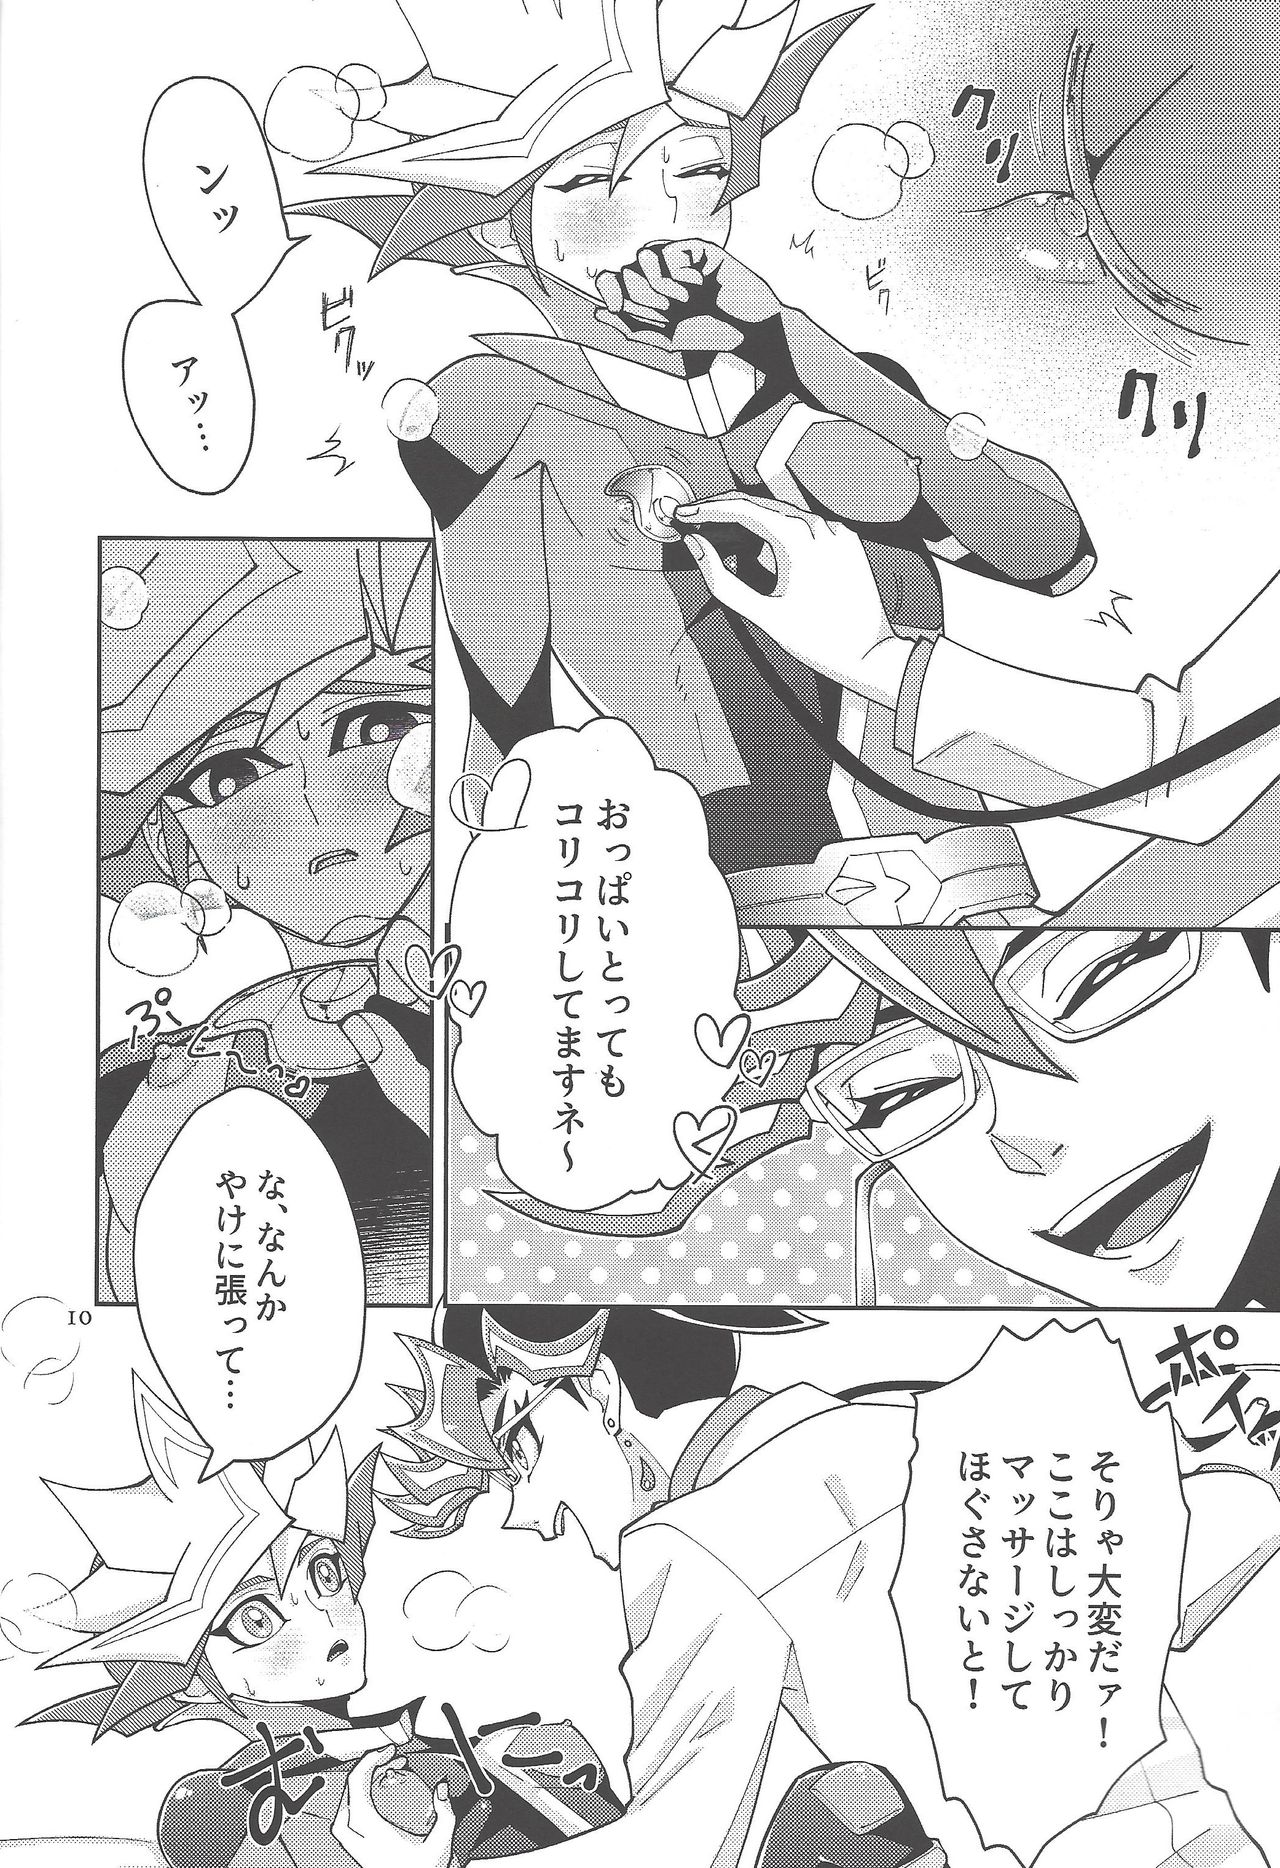 (Lucky Card! 1) [ZPT (ポミヲ)] Aiちゃんセンセーとプレメちゃん2 (遊☆戯☆王VRAINS)